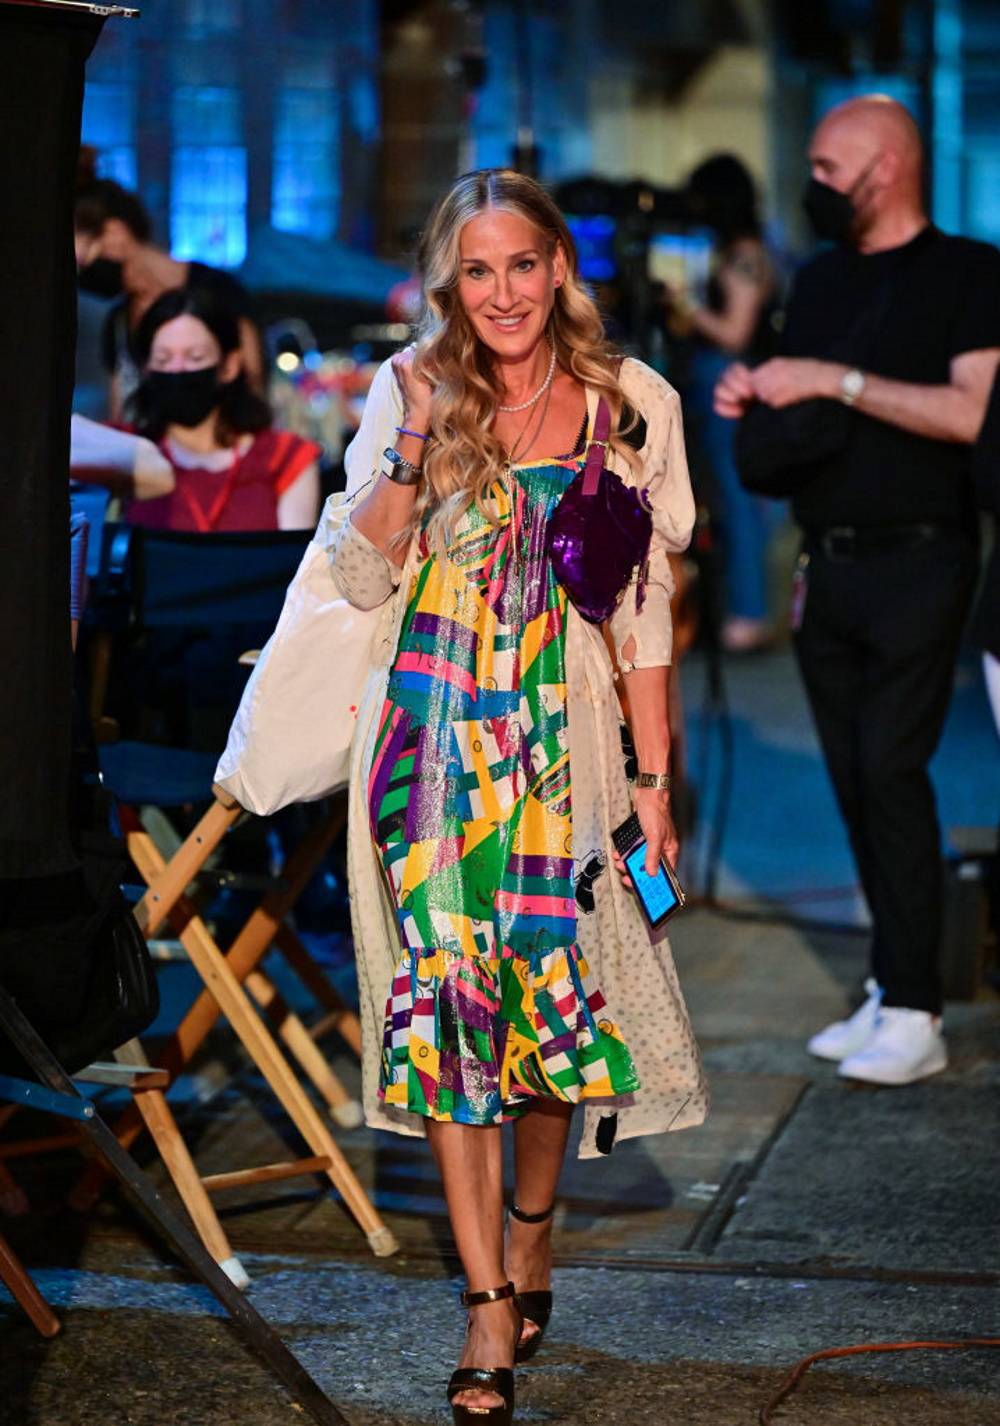 Sarah Jessica Parker jako Carrie Bradshaw na planie And Just Like That... (Fot. Getty Images)